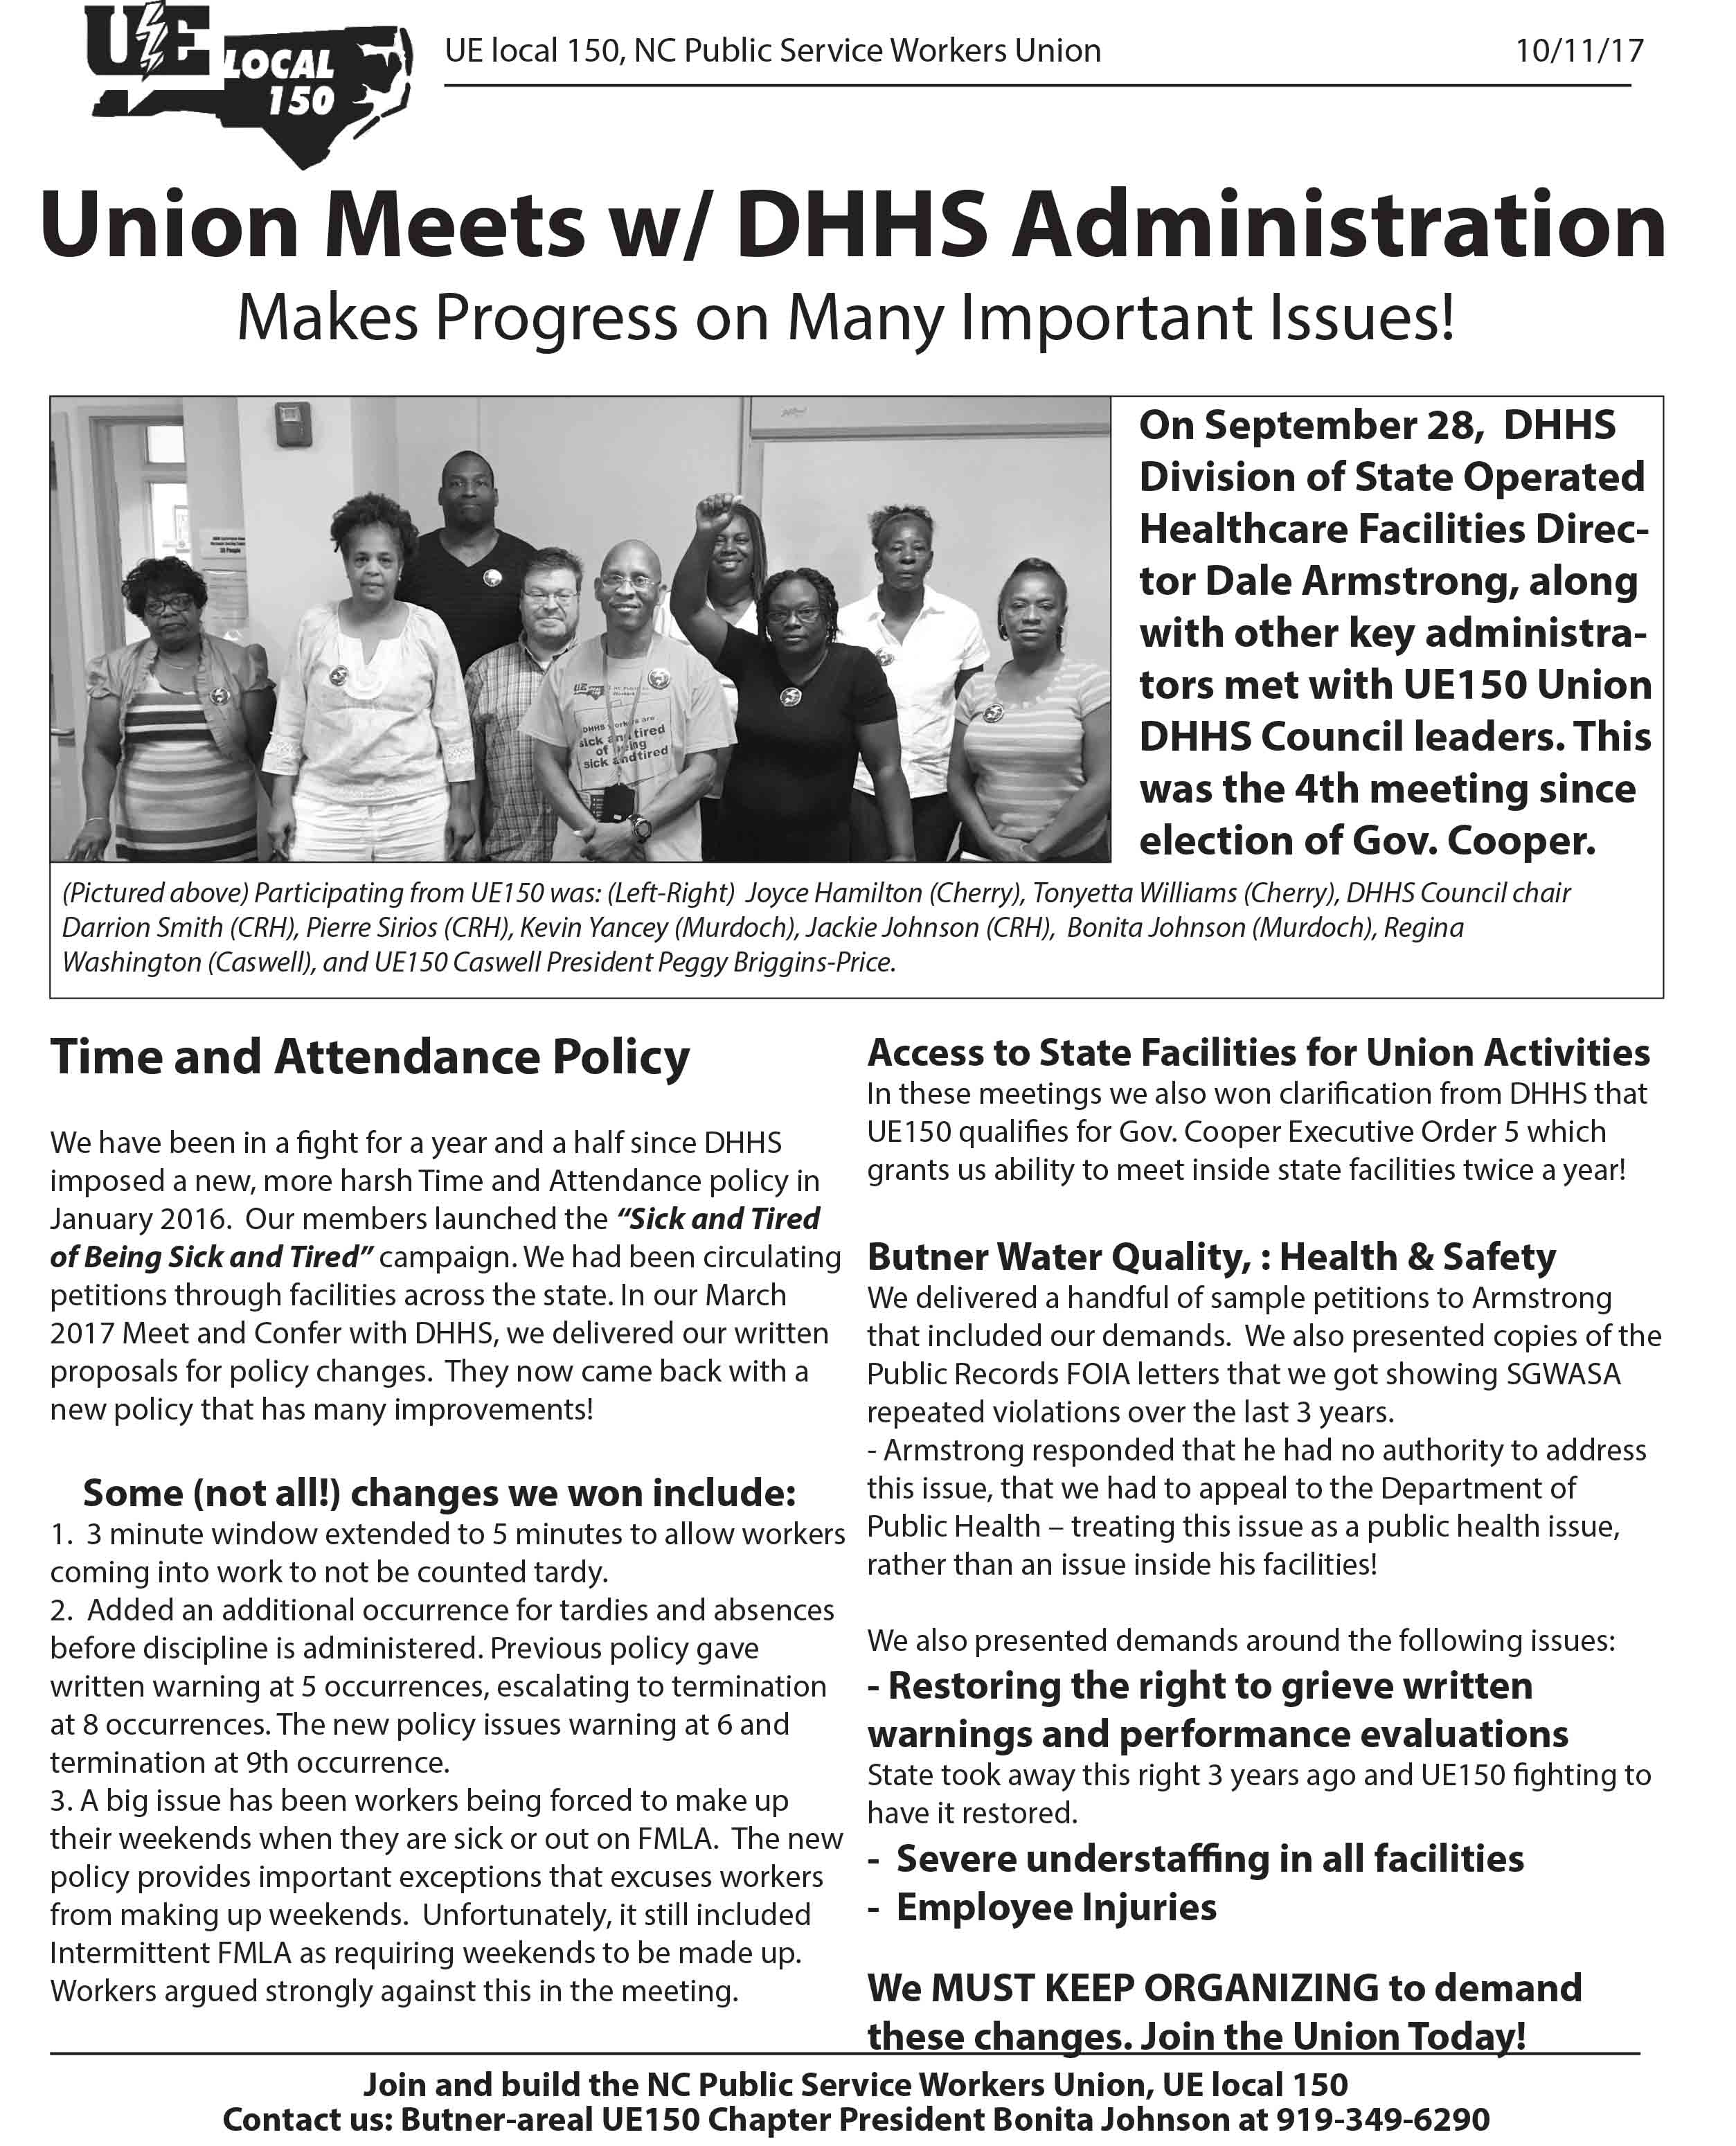 Union Meets with DHHS Administration